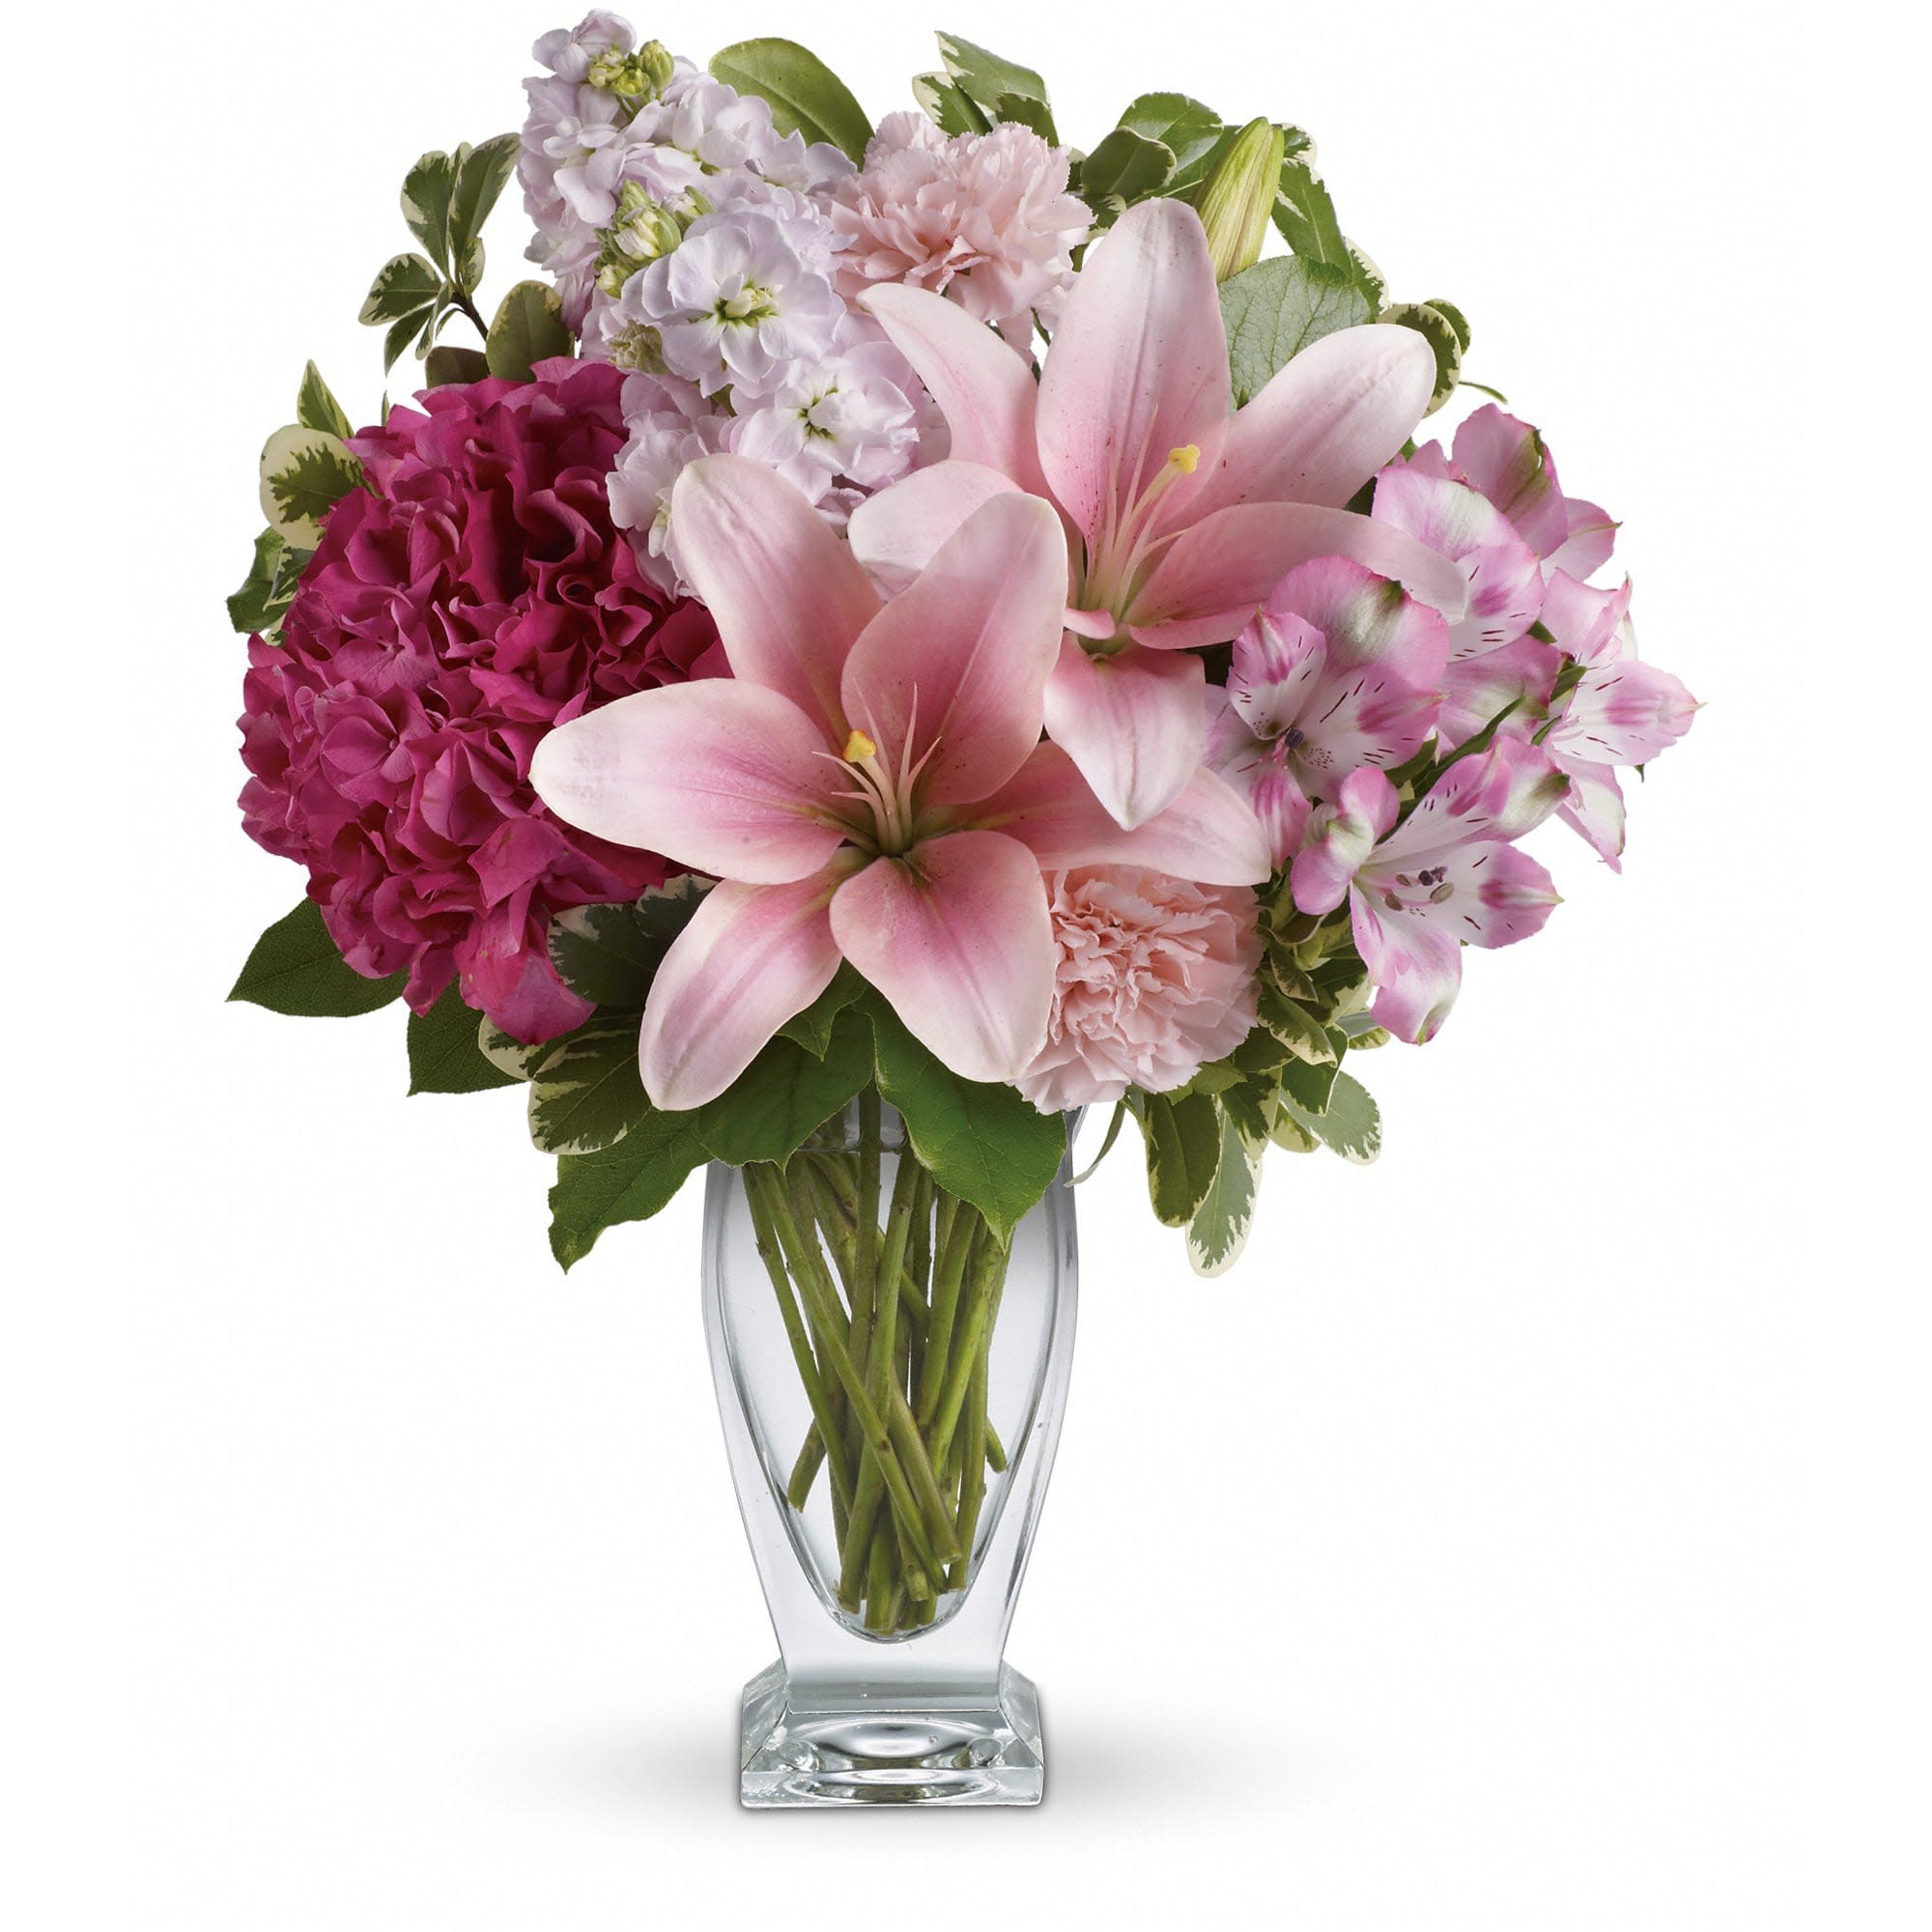 Teleflora's Blush of Love Bouquet - Celebrate your love with this beautifully blushing bouquet! Luxurious lilies, delicate hydrangea and fragrant stock delight her senses, soothe her soul, and tickle her fancy. It's a loving gift she won't soon forget!    Includes pink hydrangea, asiatic lilies, alstroemeria, carnations and stock, accented with fresh greens. Delivered in a Couture vase.    Approximately 14&quot; W x 17&quot; H    Orientation: One-Sided    As Shown : TEV21-1A  Deluxe : TEV21-1B  Premium : TEV21-1C